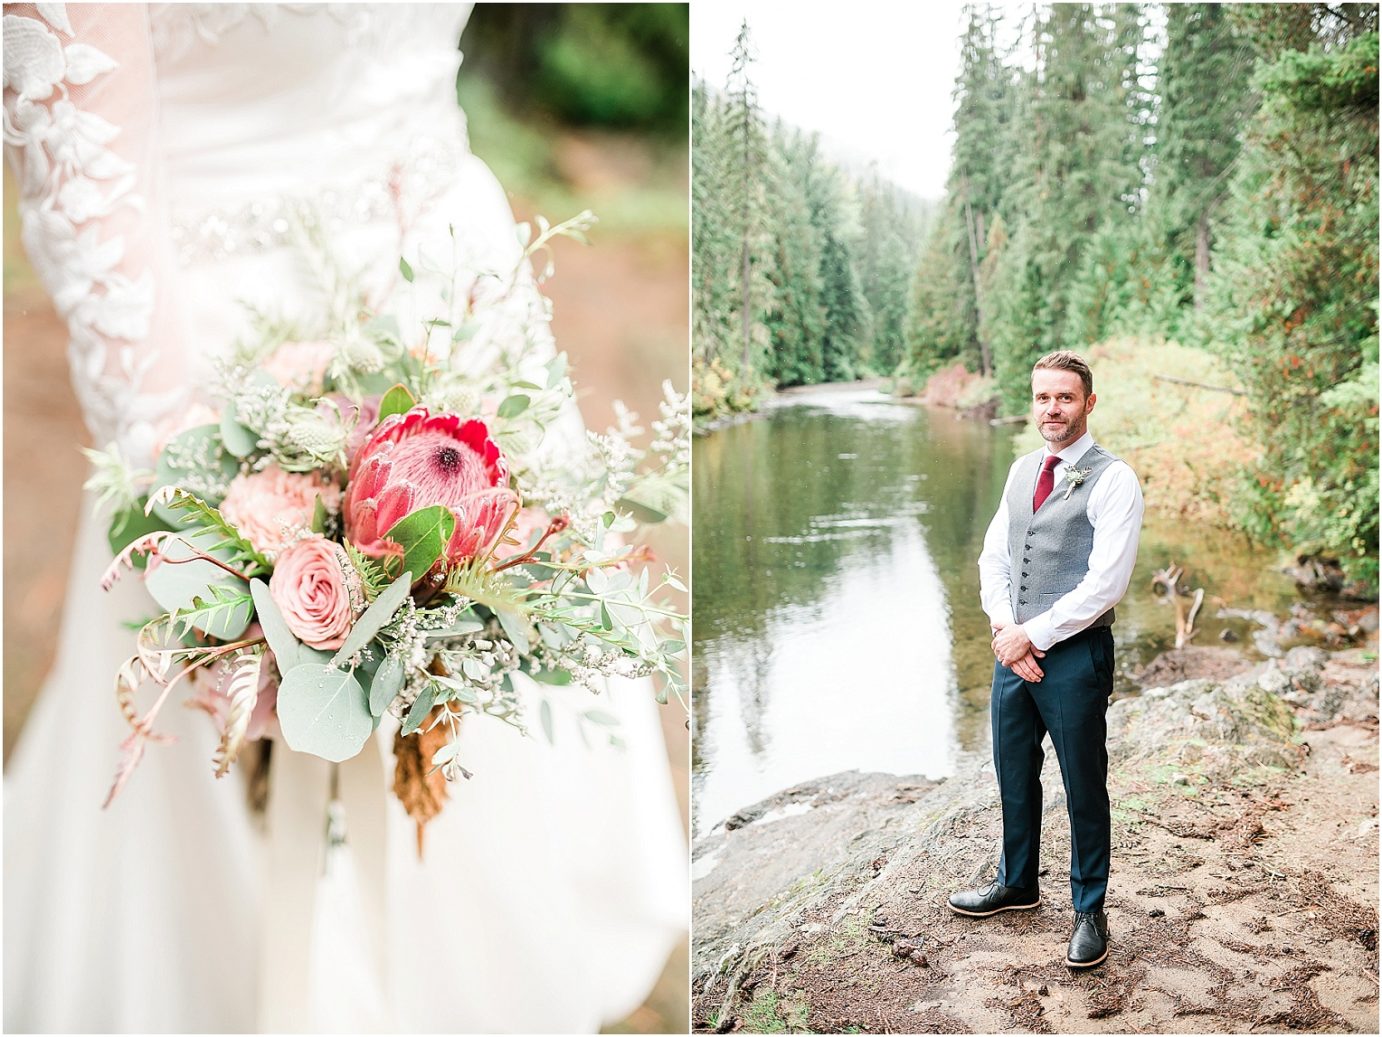 Intimate Leavenworth Elopement Rick and Tracey Leavenworth Photographer pink ice protea bouquet